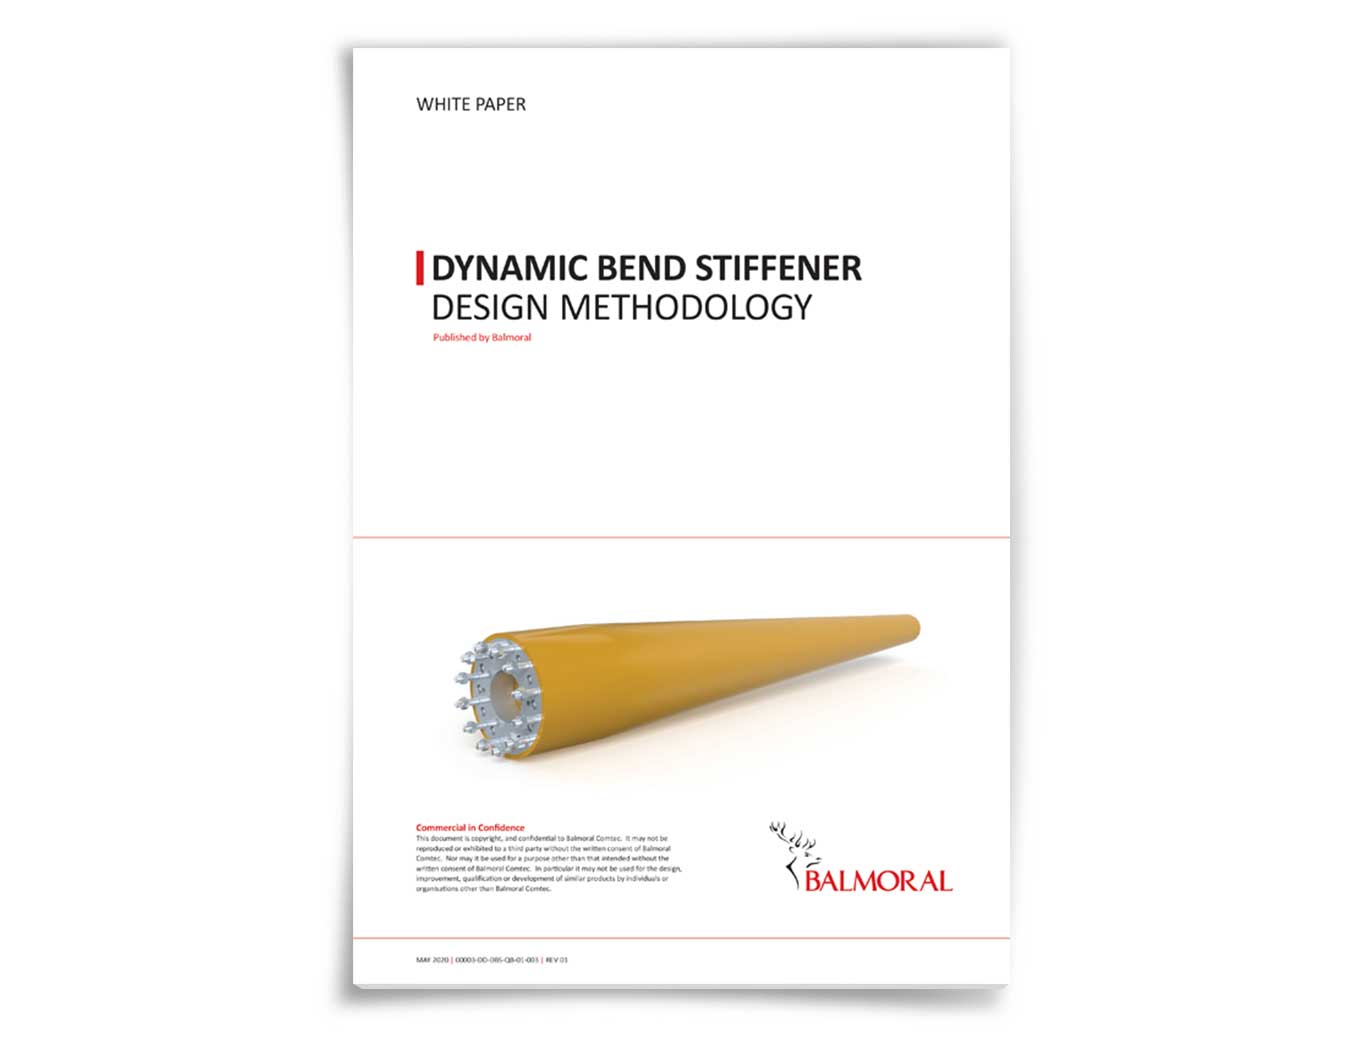 Dynamic bend stiffener white paper cover